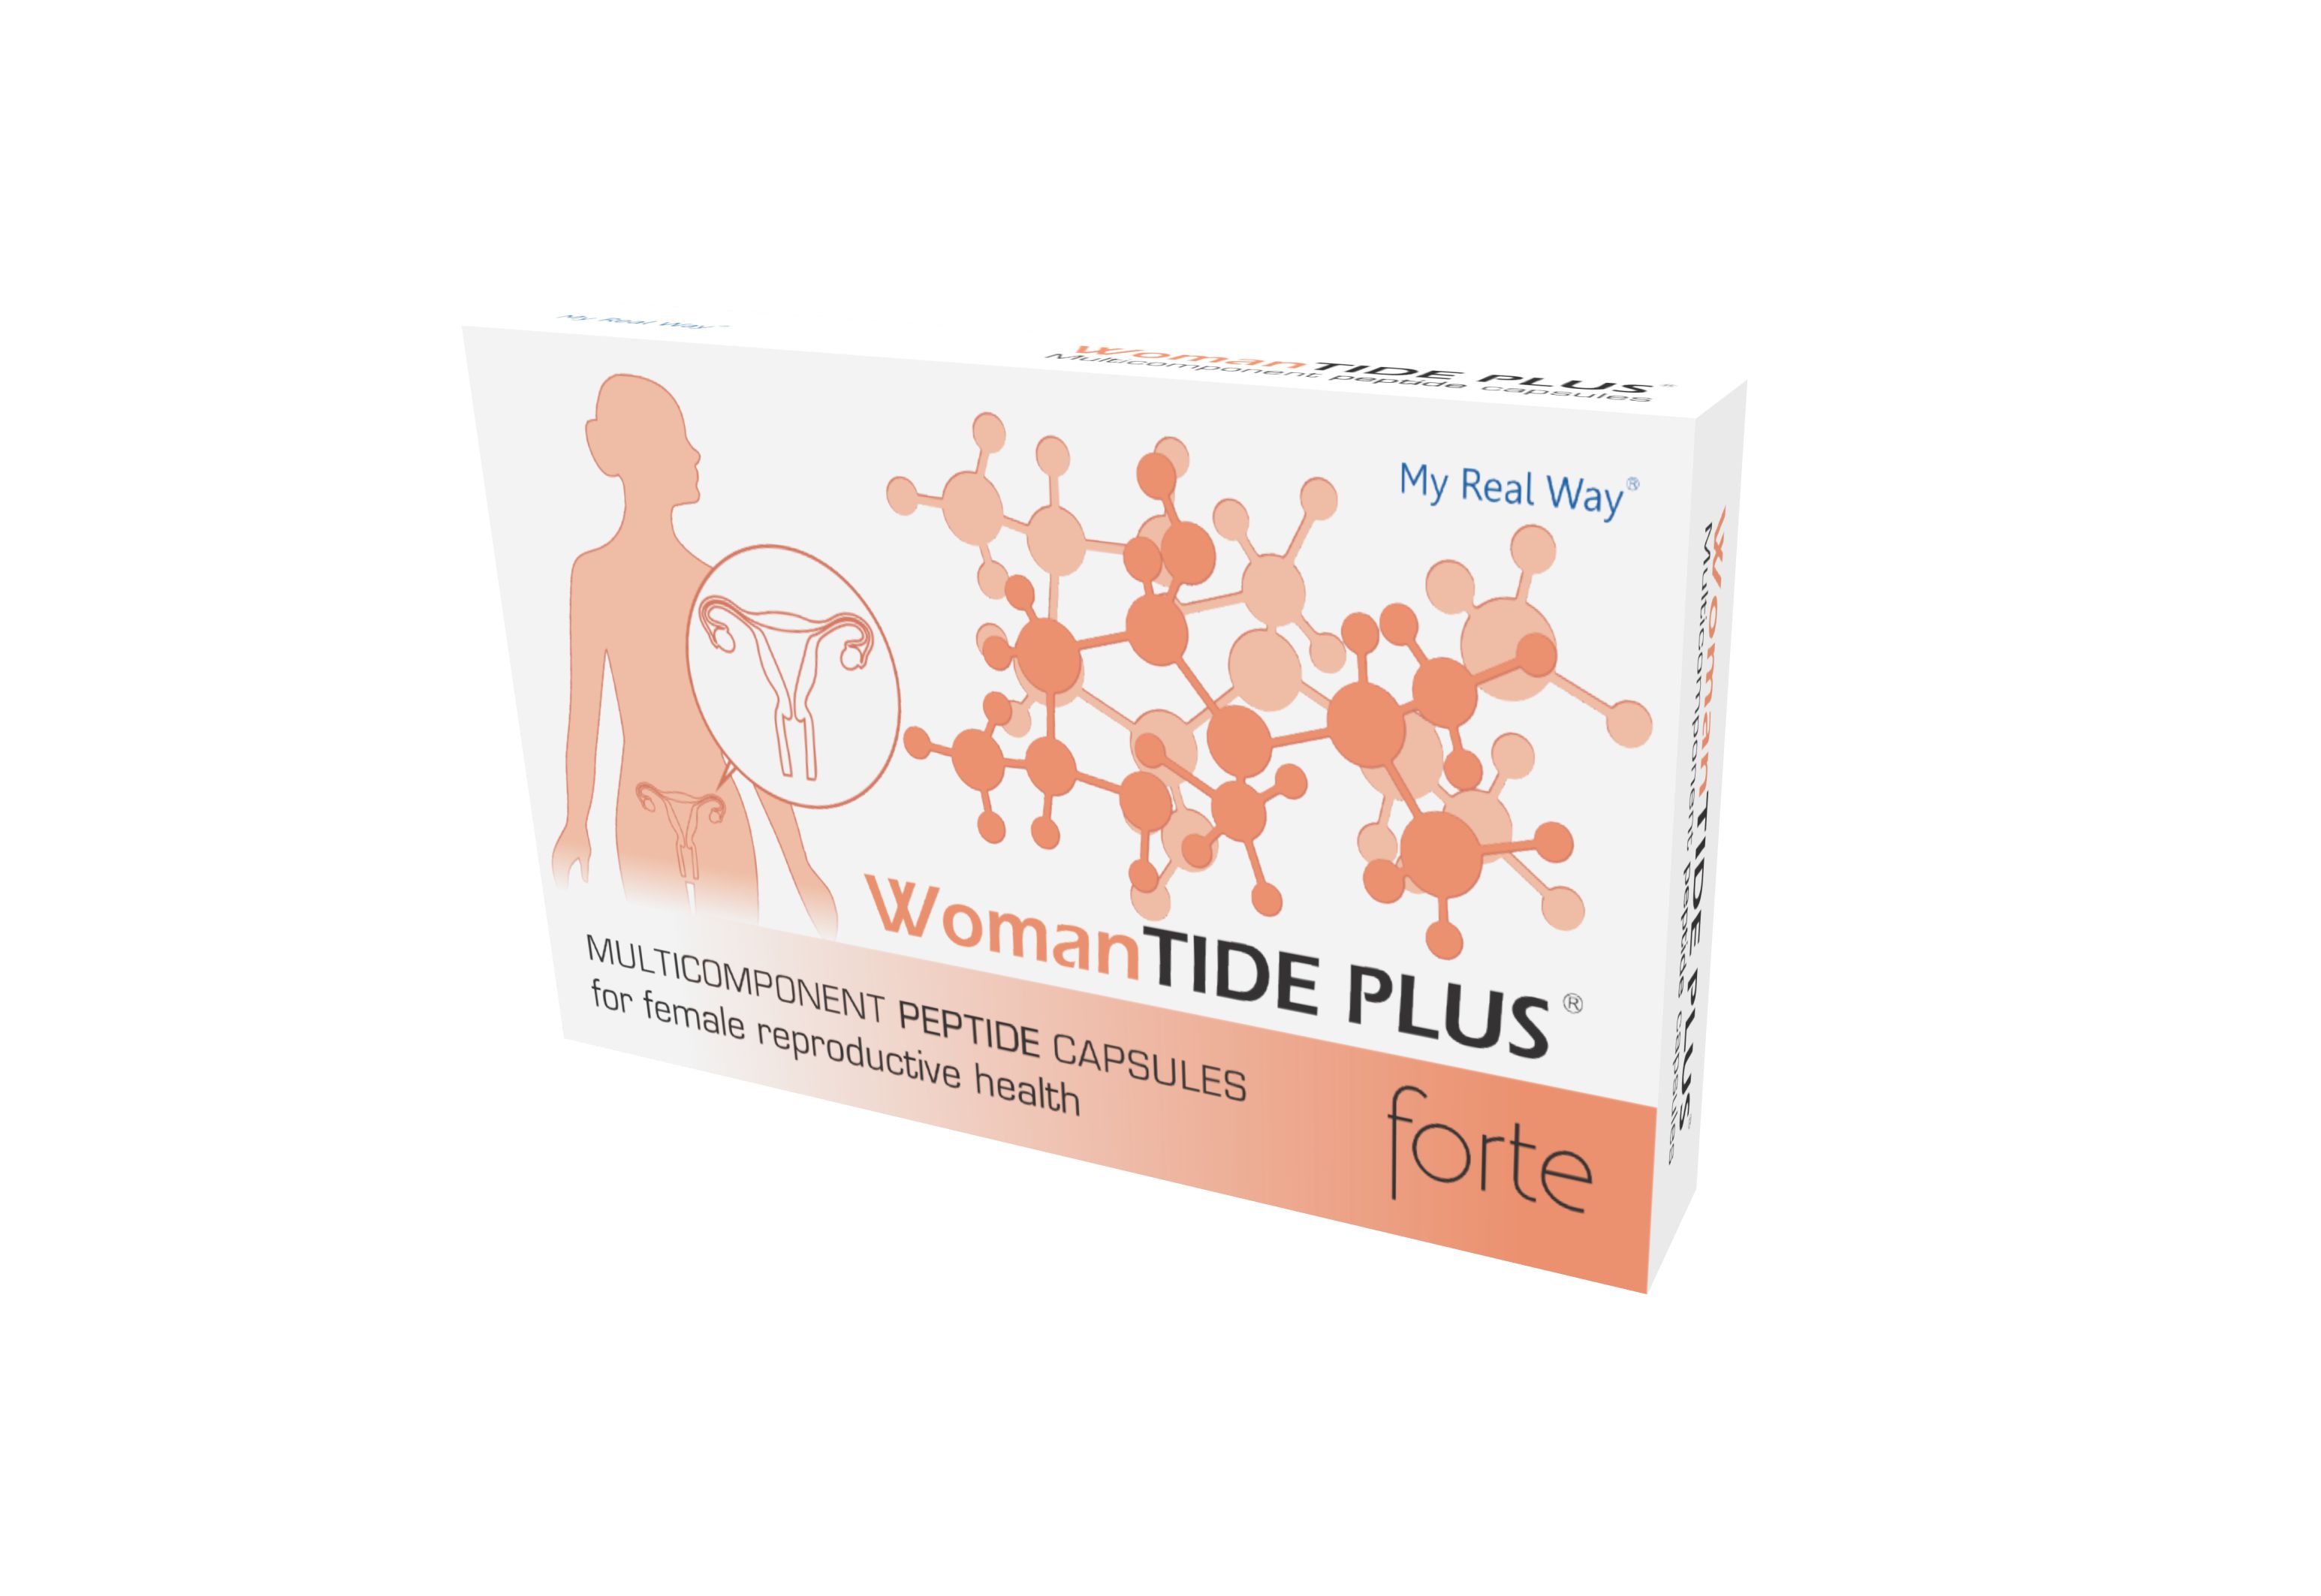 WomanTIDE PLUS forte peptides for women